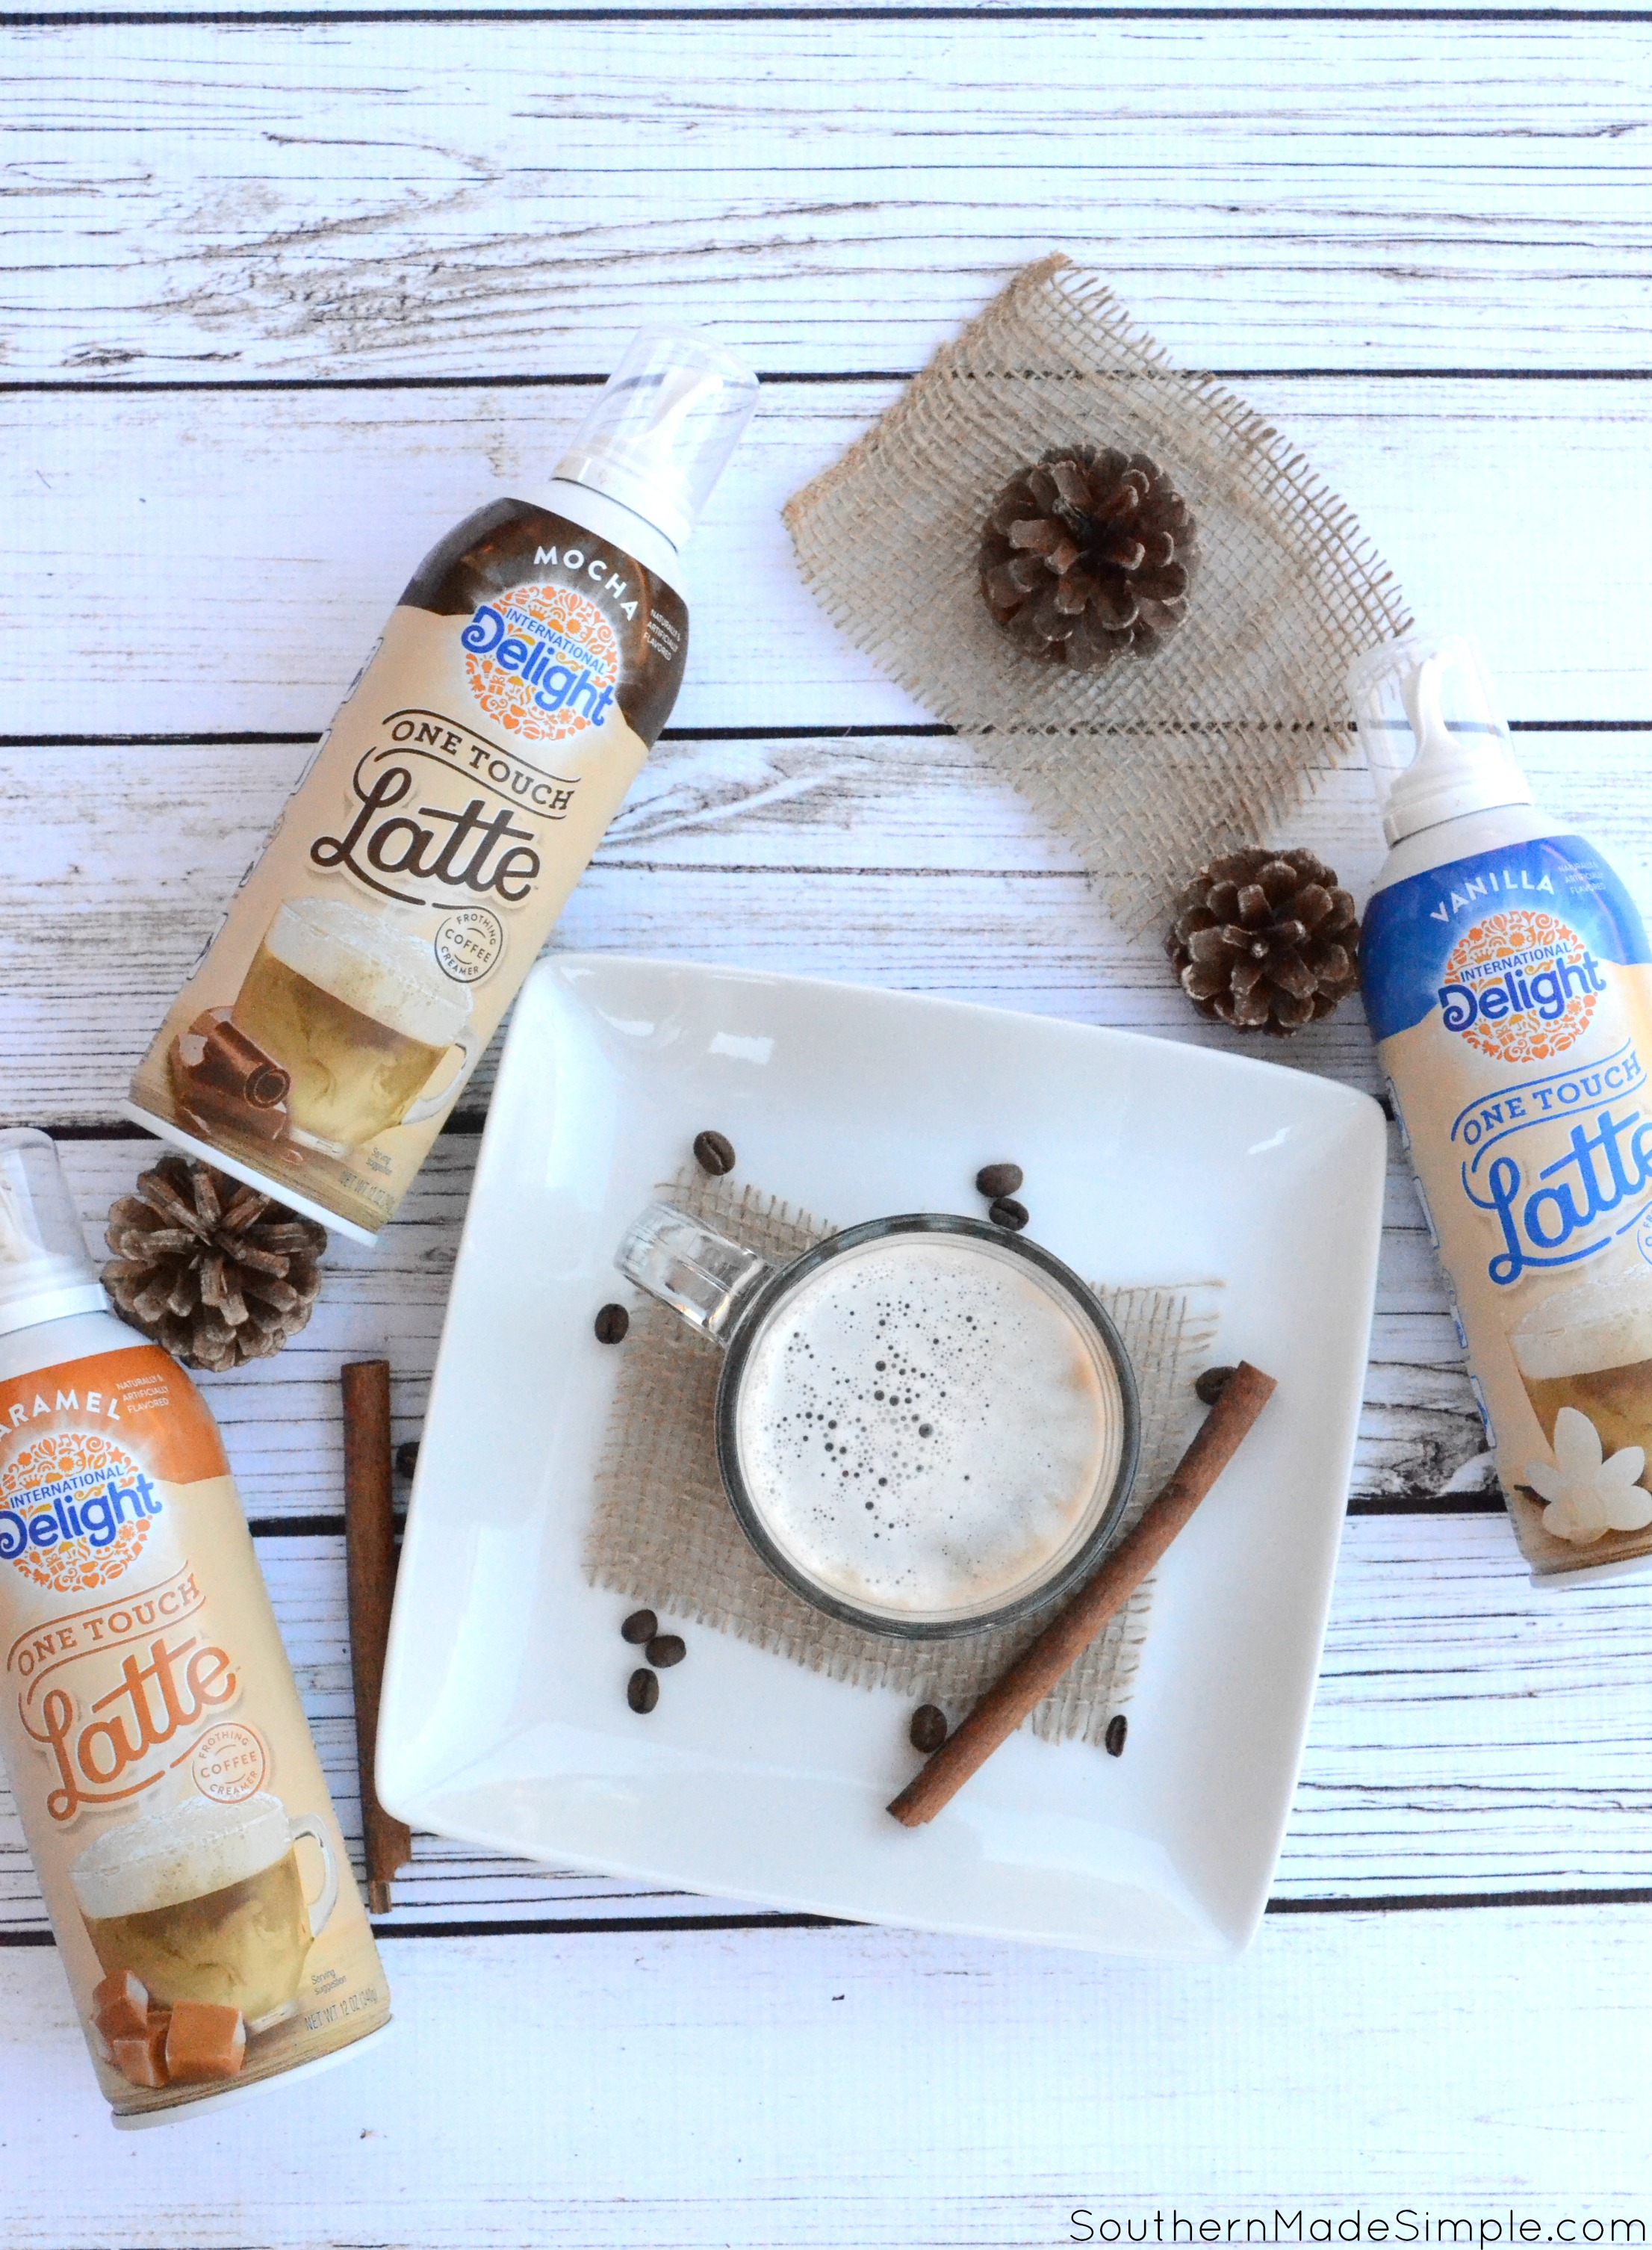 If you love to get your hands on a tall warm latte but can't afford to pay those crazy coffee shop prices? Now you can make a latte at home in seconds with International Delight One Tough Latte! #LatteMadeEasy @Walmart